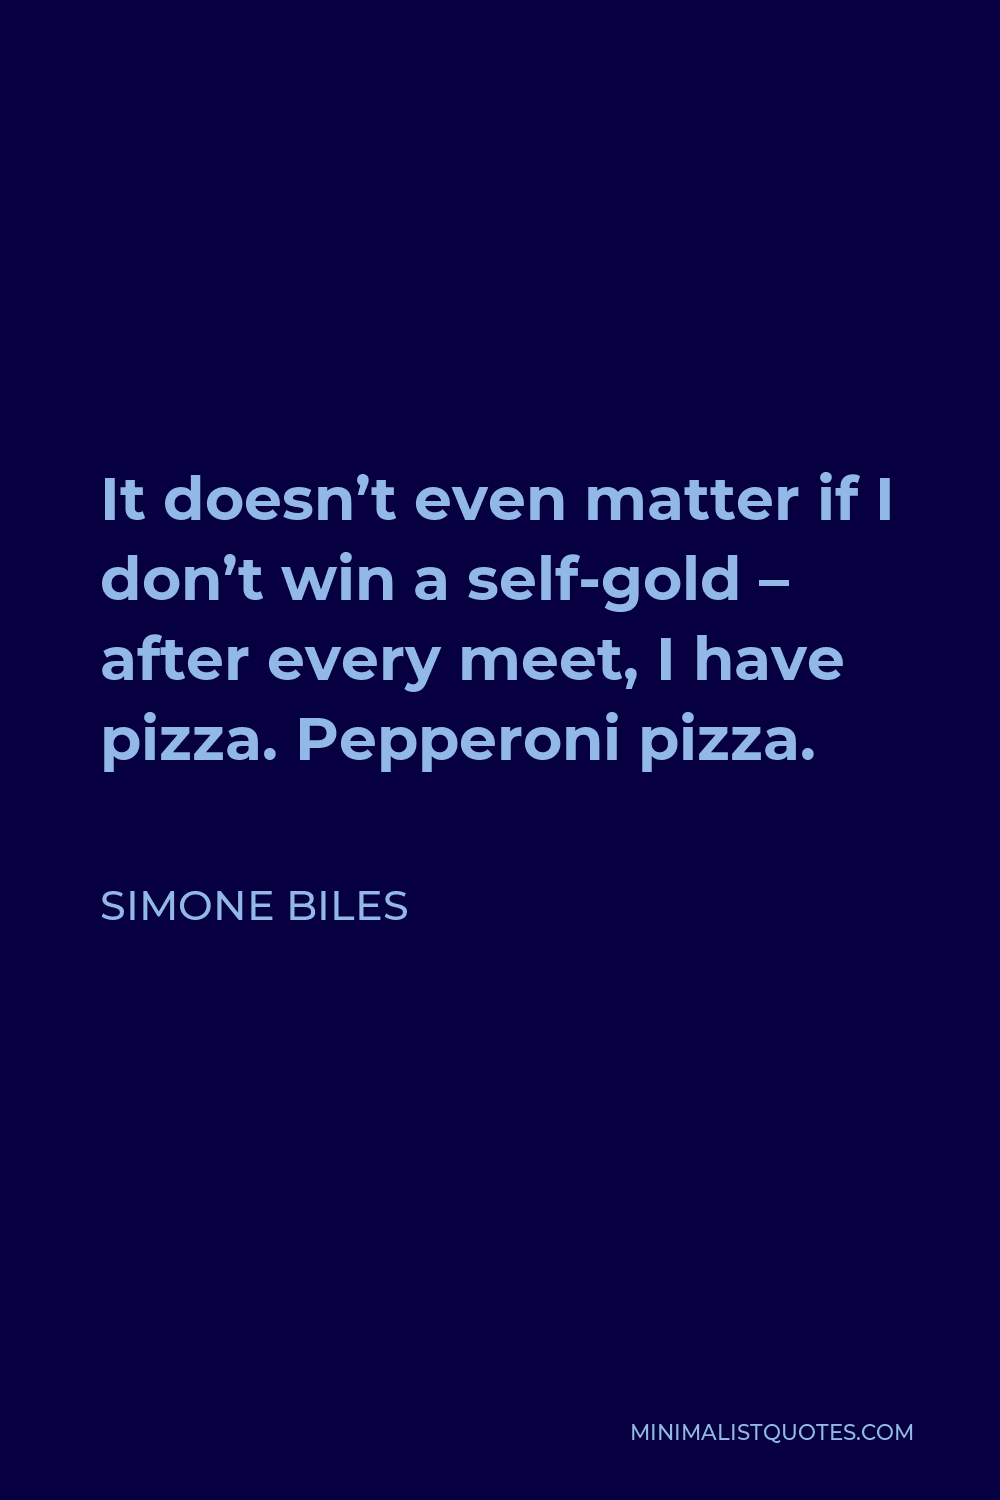 Simone Biles Quote - It doesn’t even matter if I don’t win a self-gold – after every meet, I have pizza. Pepperoni pizza.